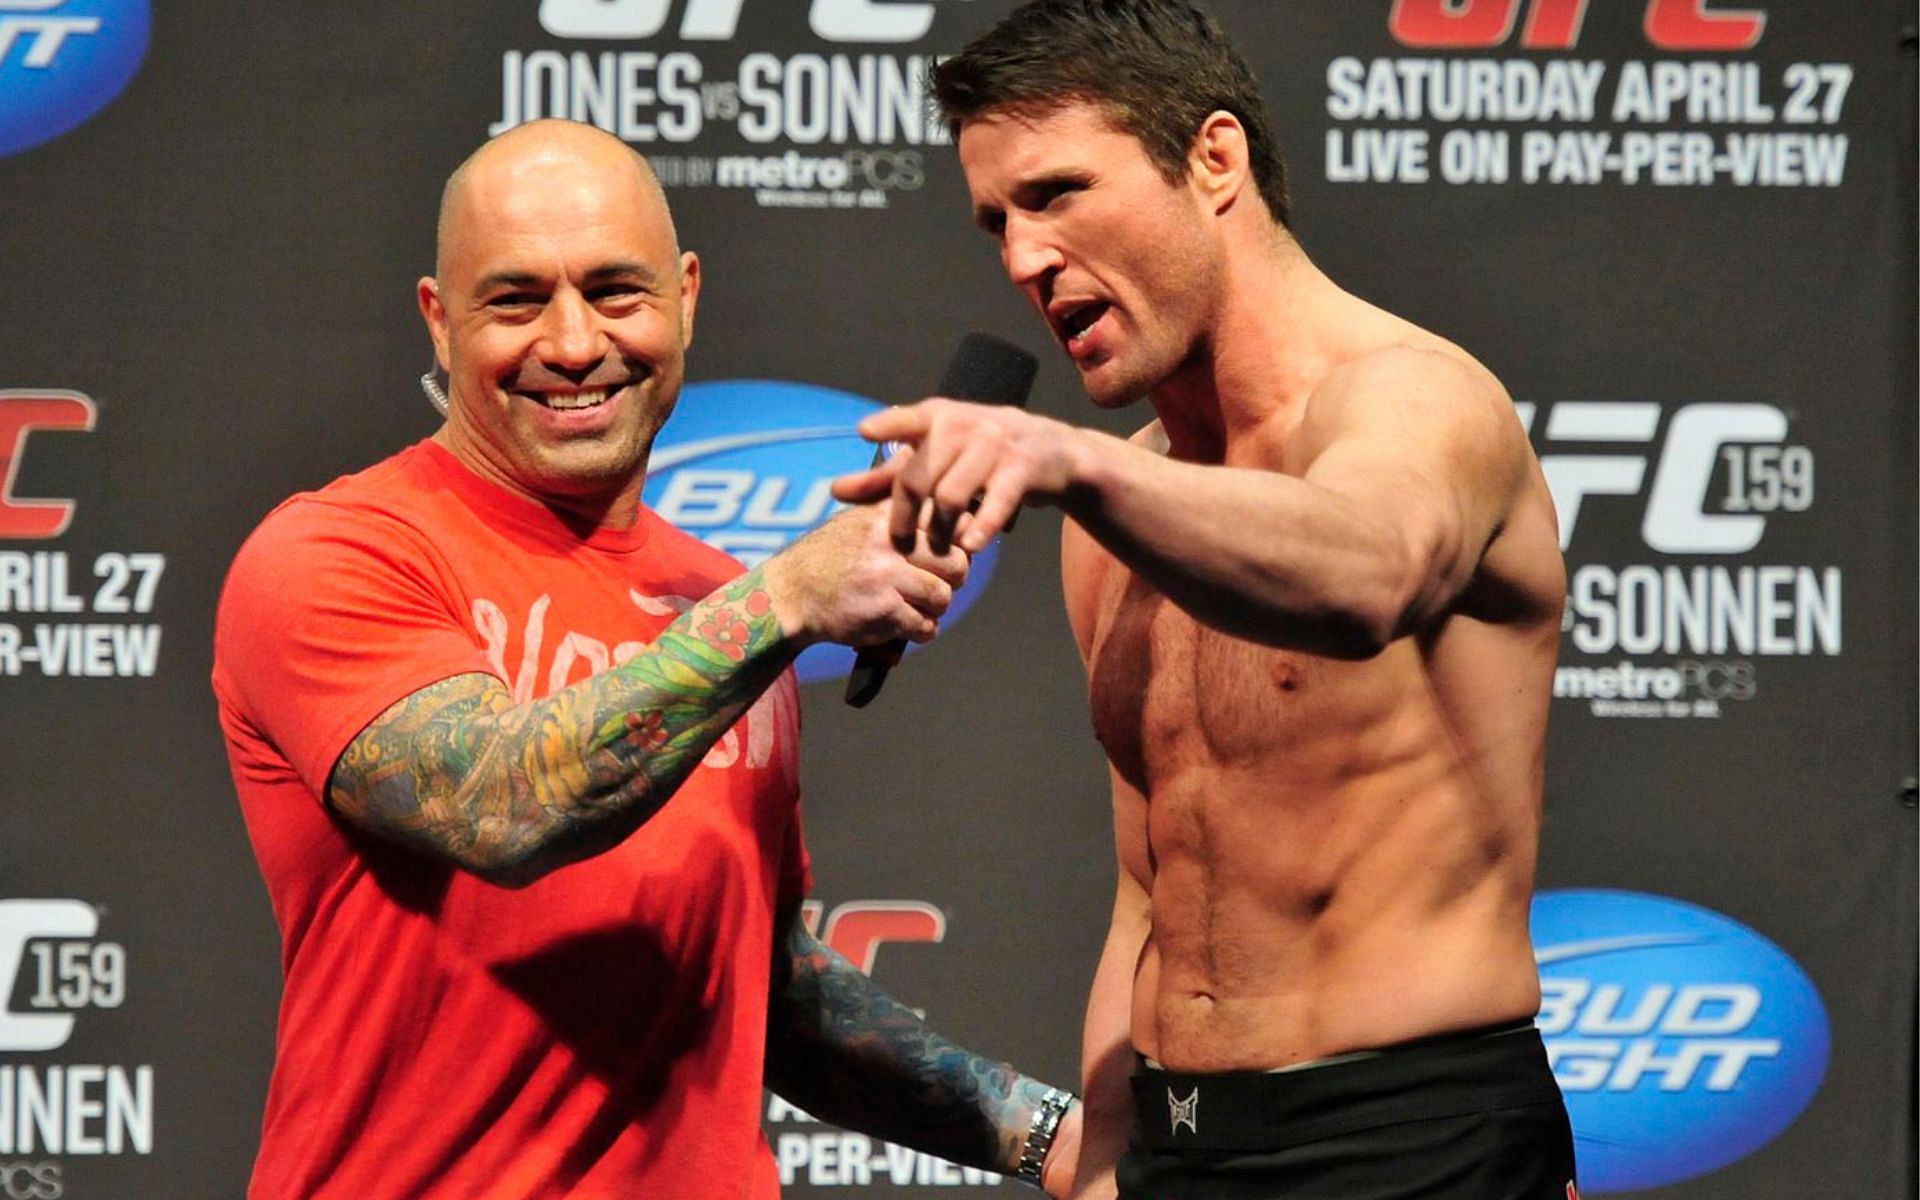 One of the original heels in the UFC, Chael Sonnen